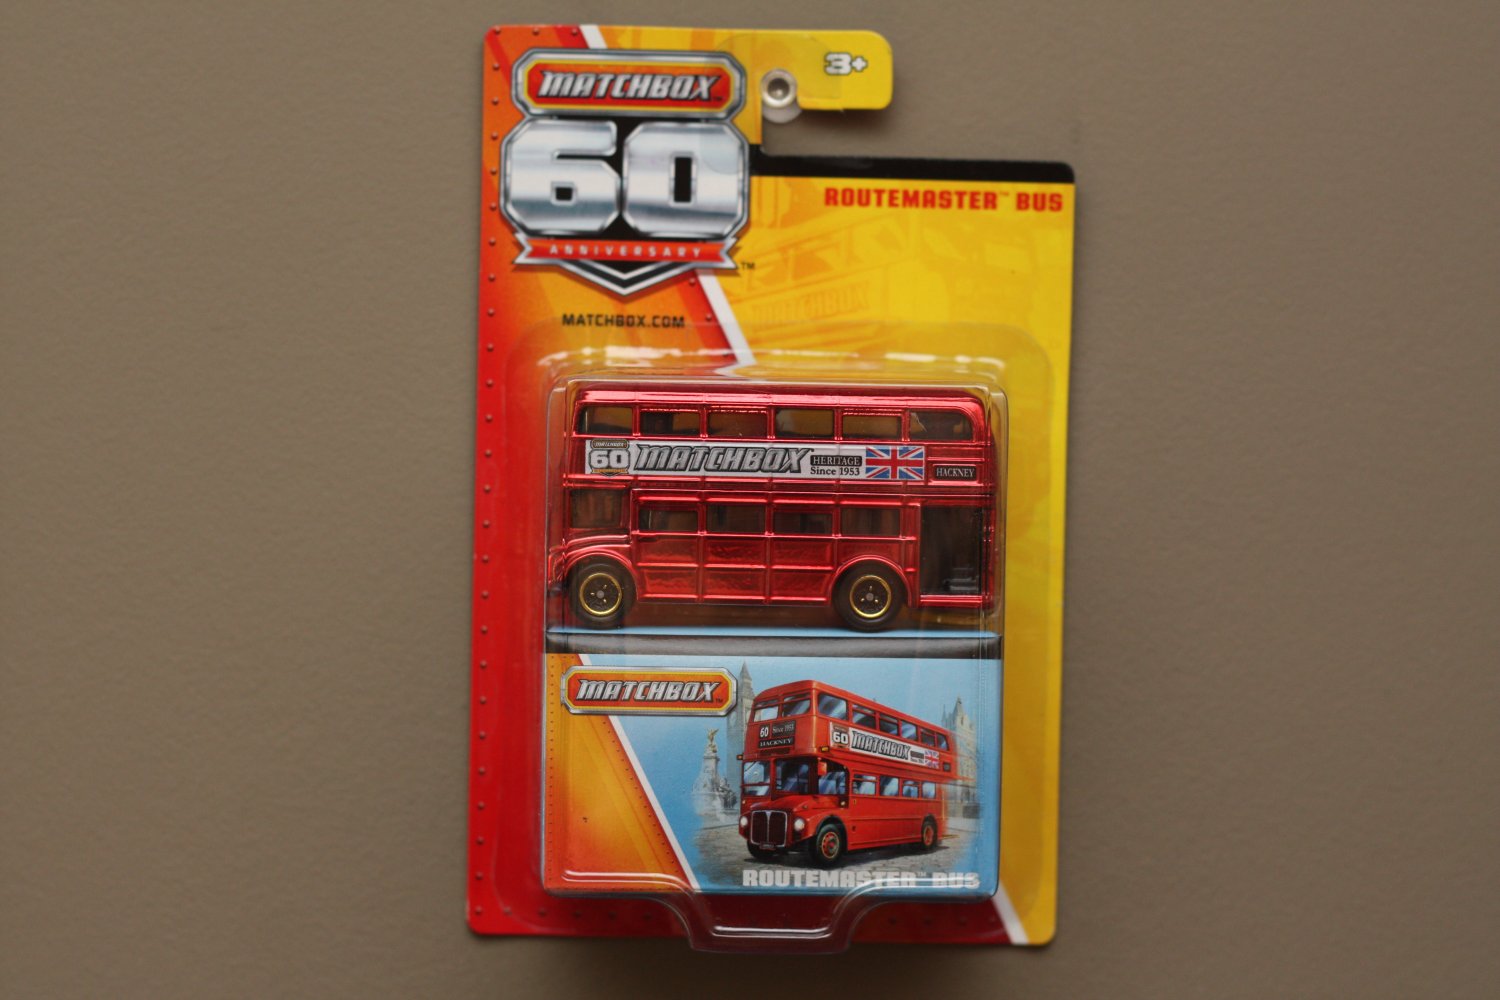 Matchbox 2013 60th Anniversary Commemorative Edition Routemaster Bus (red) (CHROME CHASE)